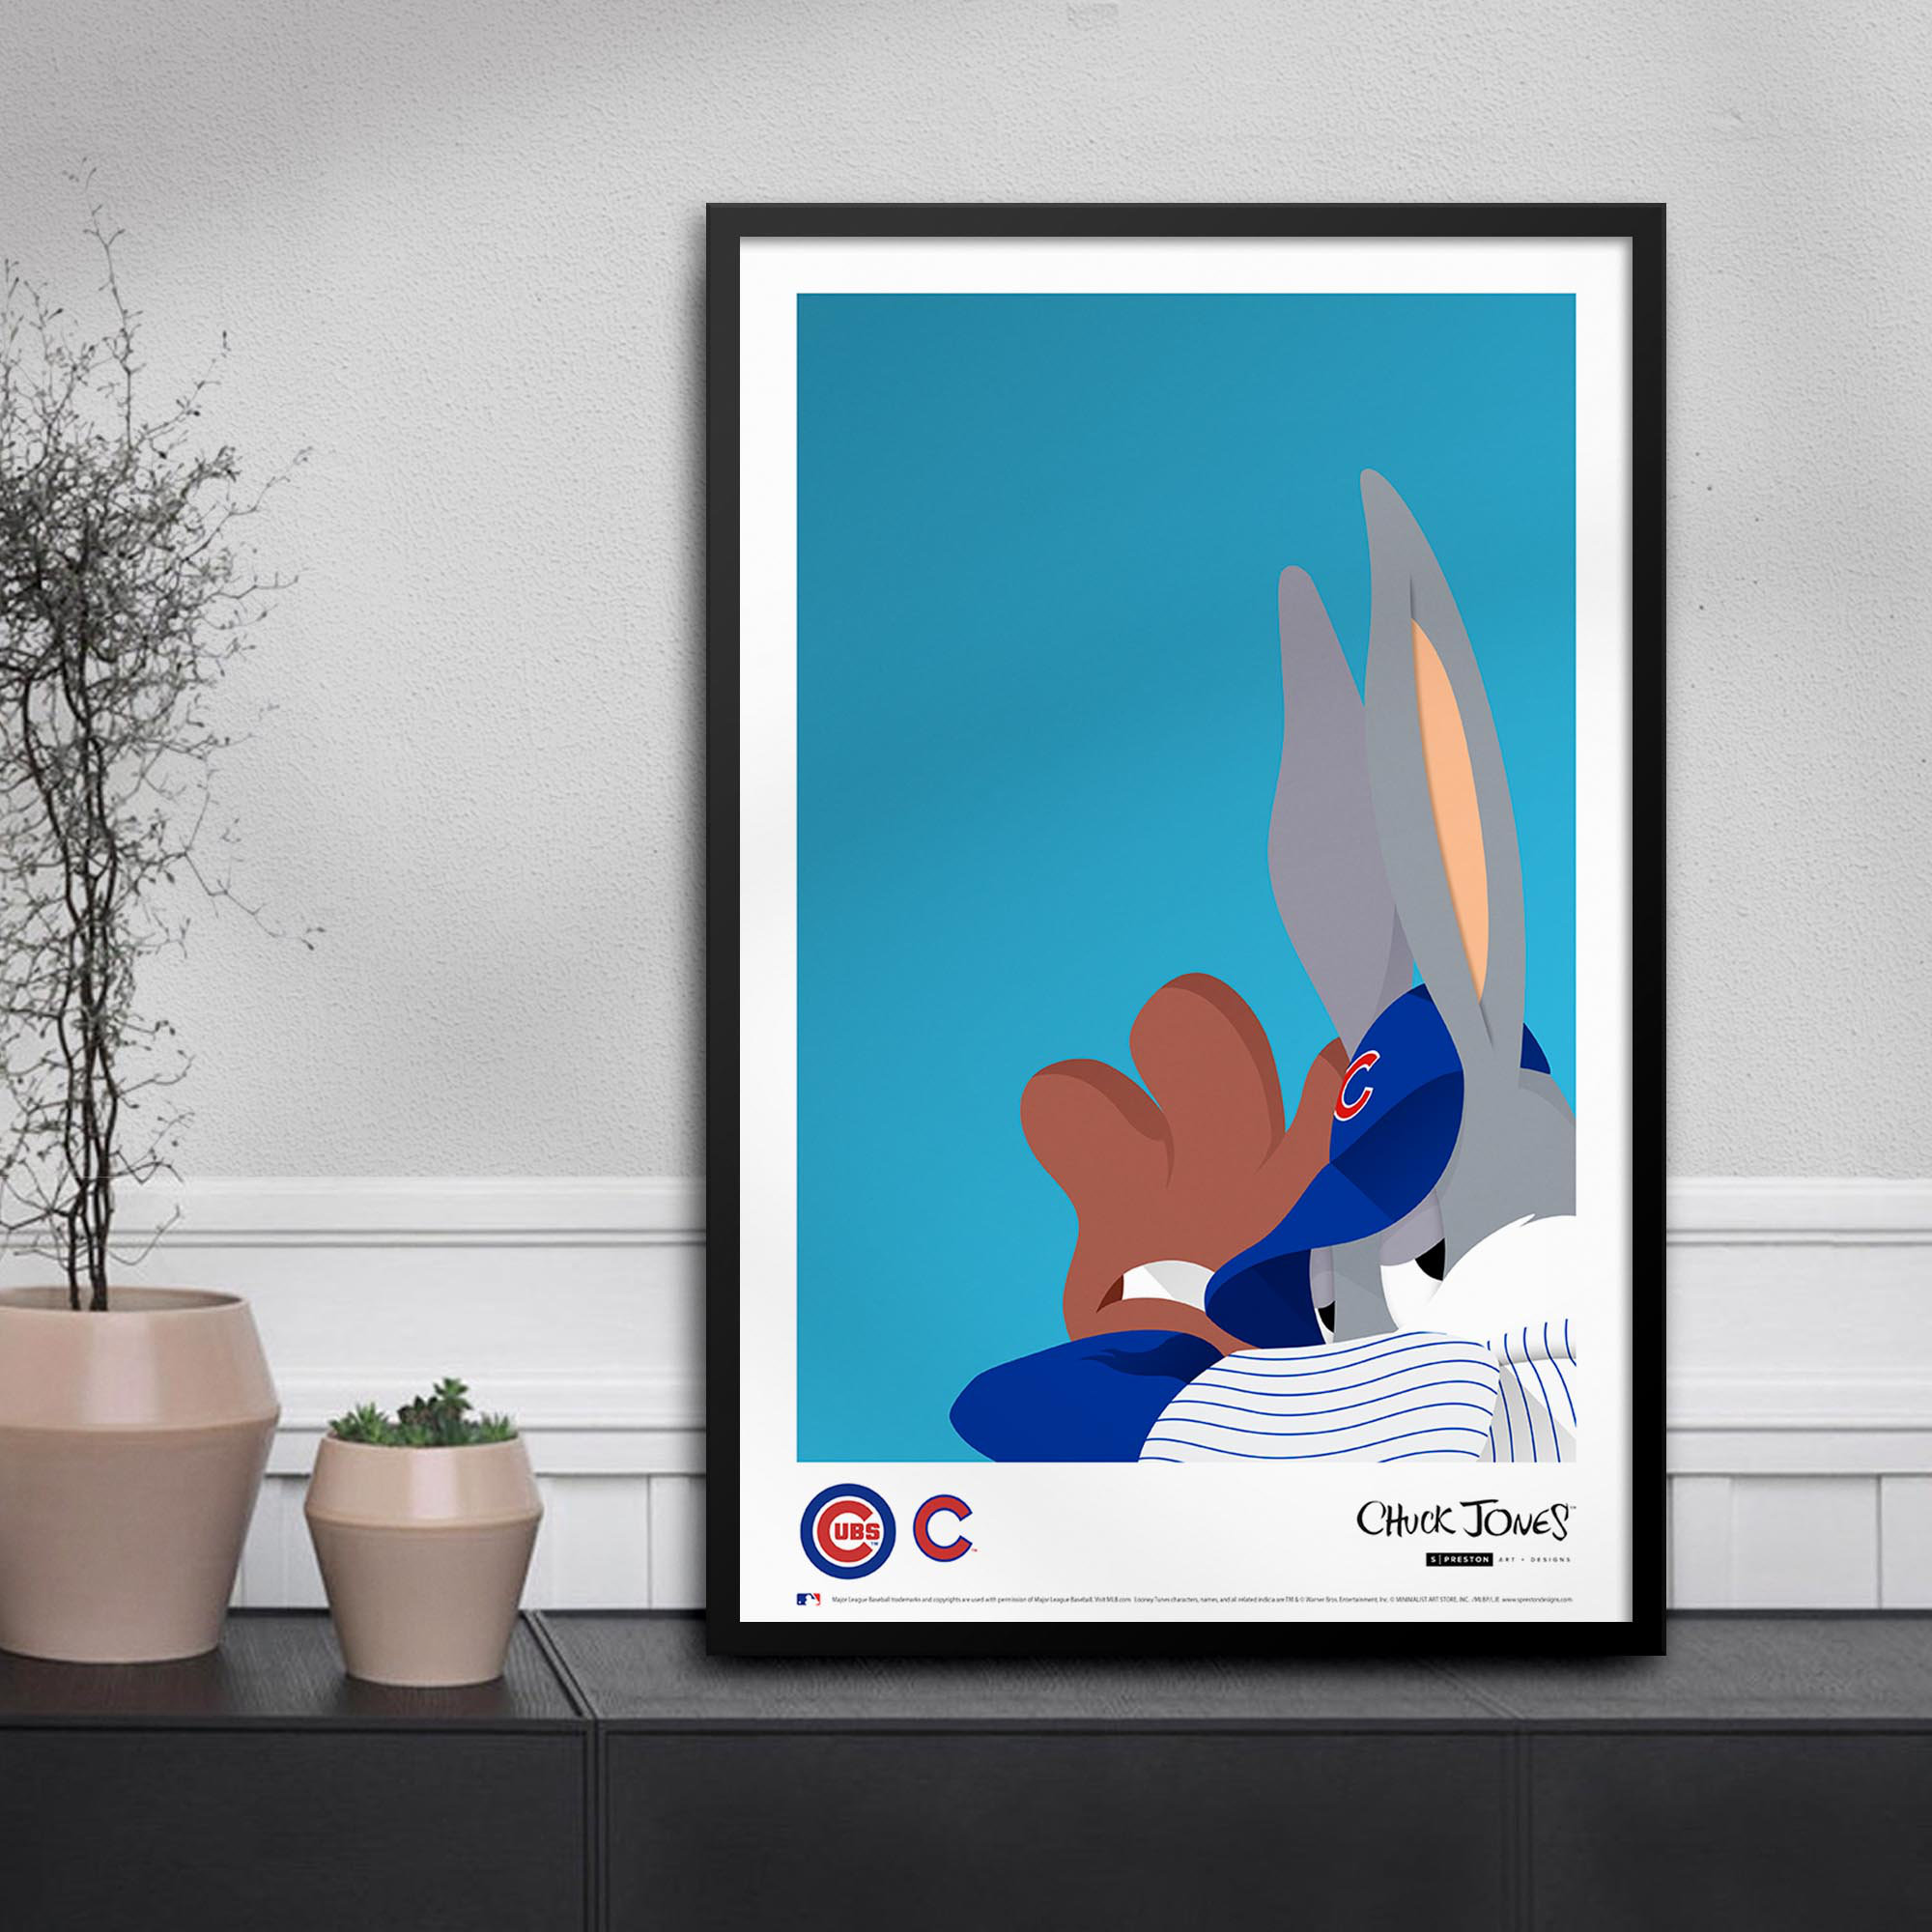 Tampa Bay Rays 11 x 17 Looney Tunes Poster Print